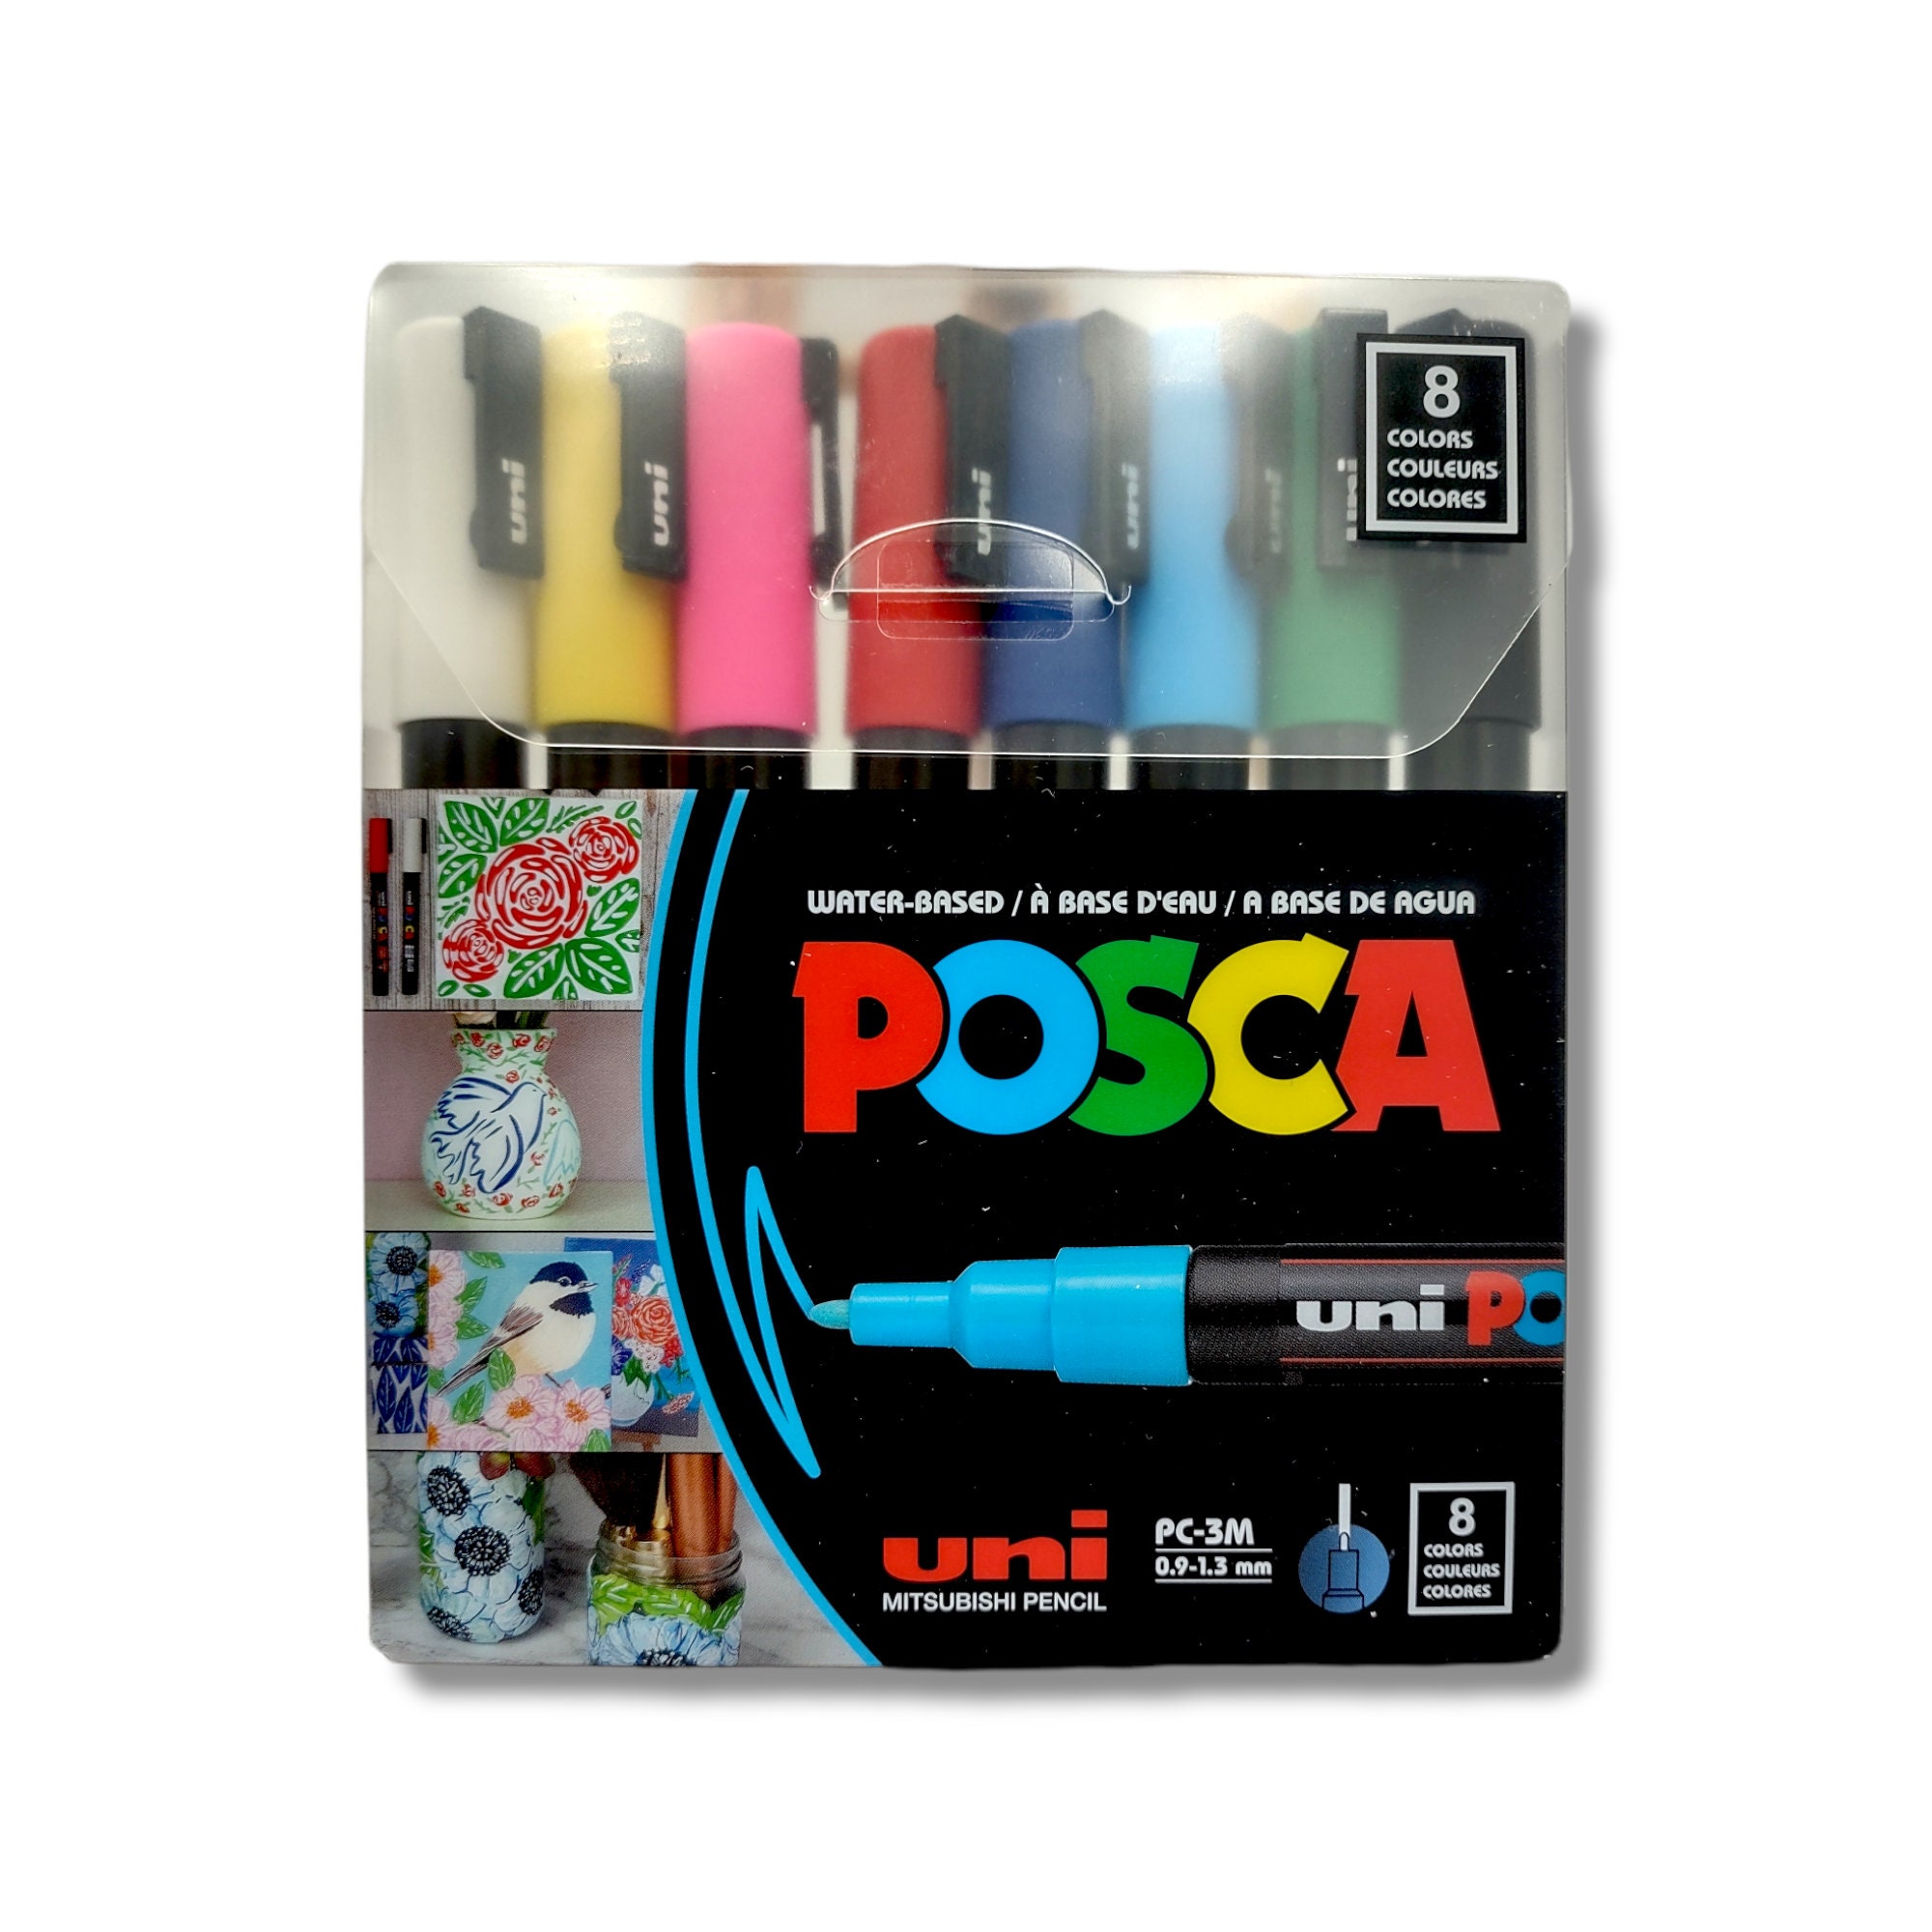 Uni-posca Japan Paint Marker Pen, Medium Point, Set of 8 Color Markers  Drawing, Painting, Fabric, Surfboard, Anime, Manga -  Sweden